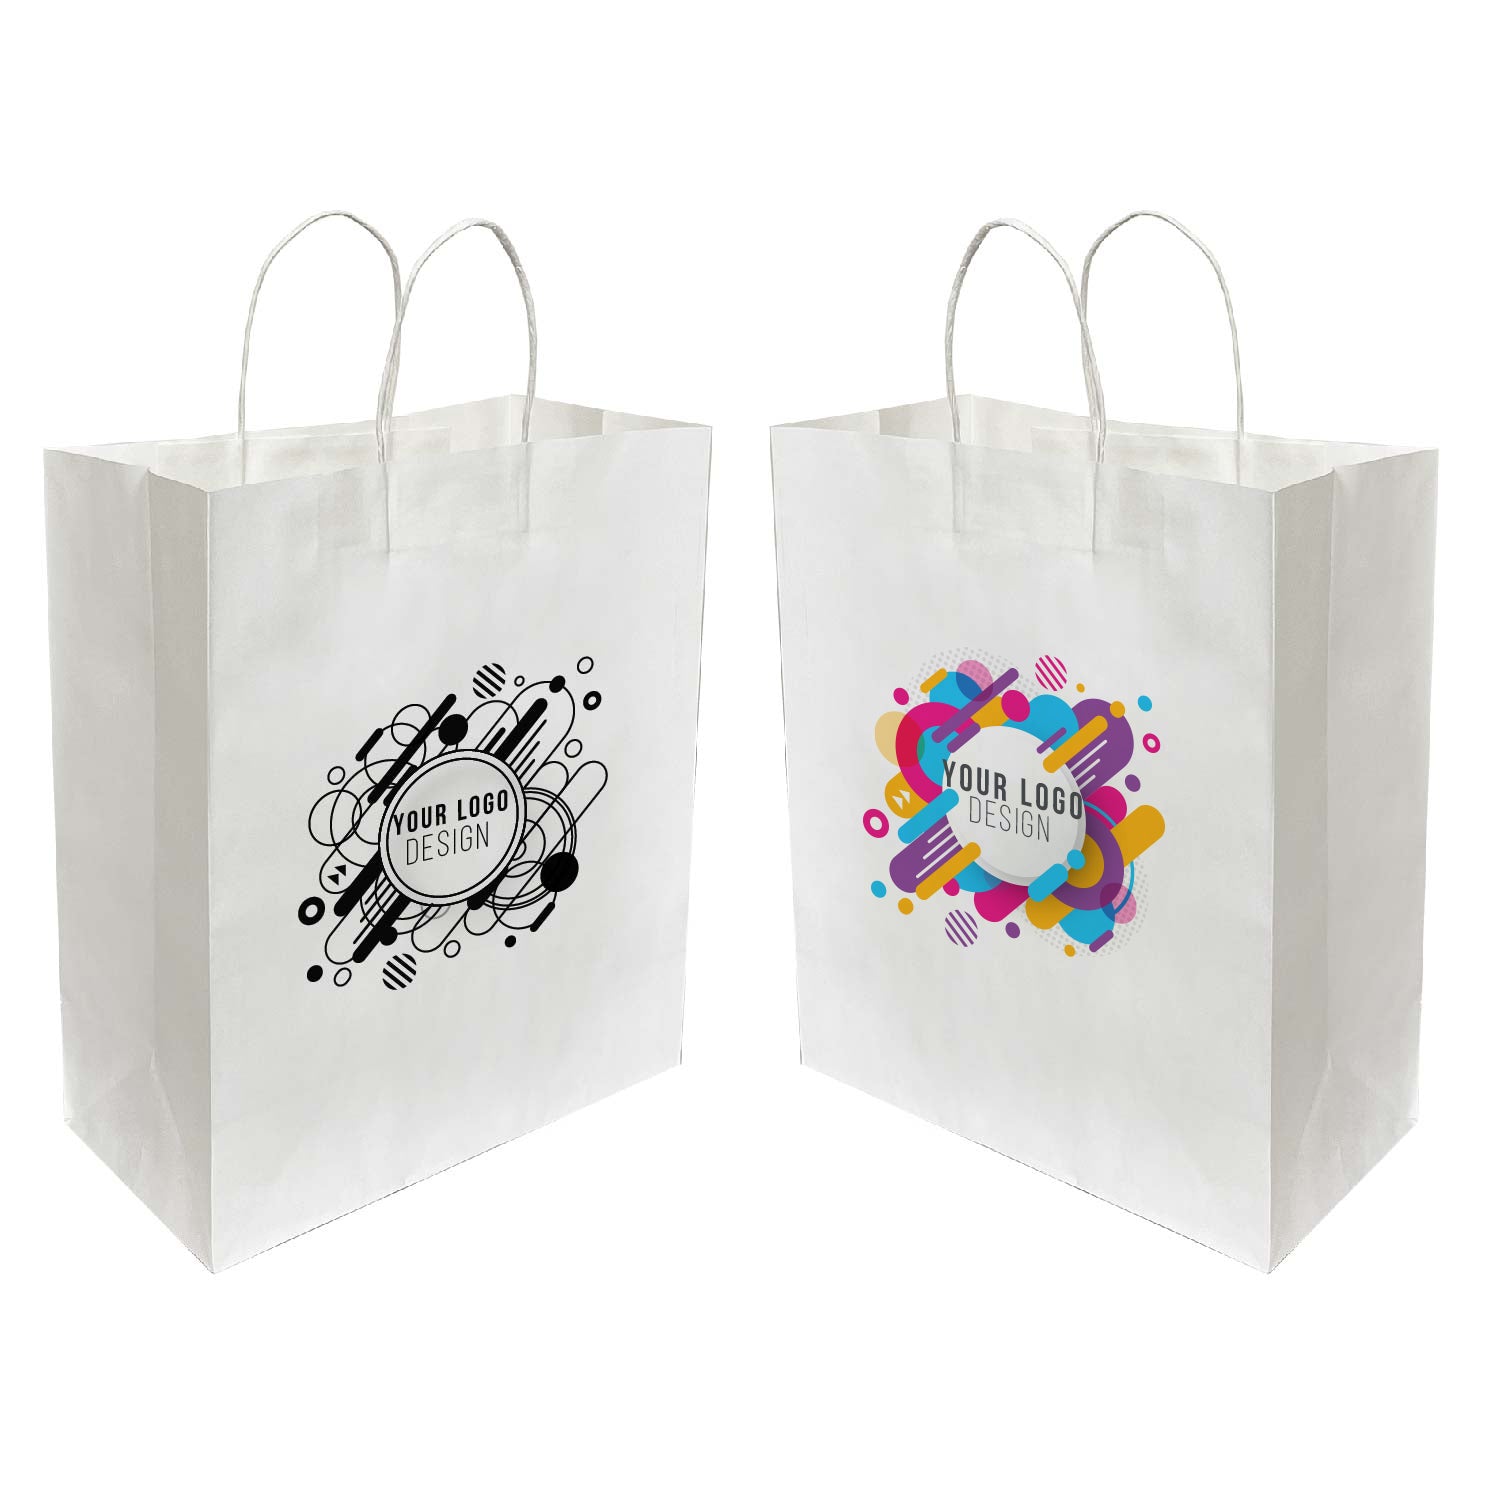 Two white shopping bags with custom printed logo